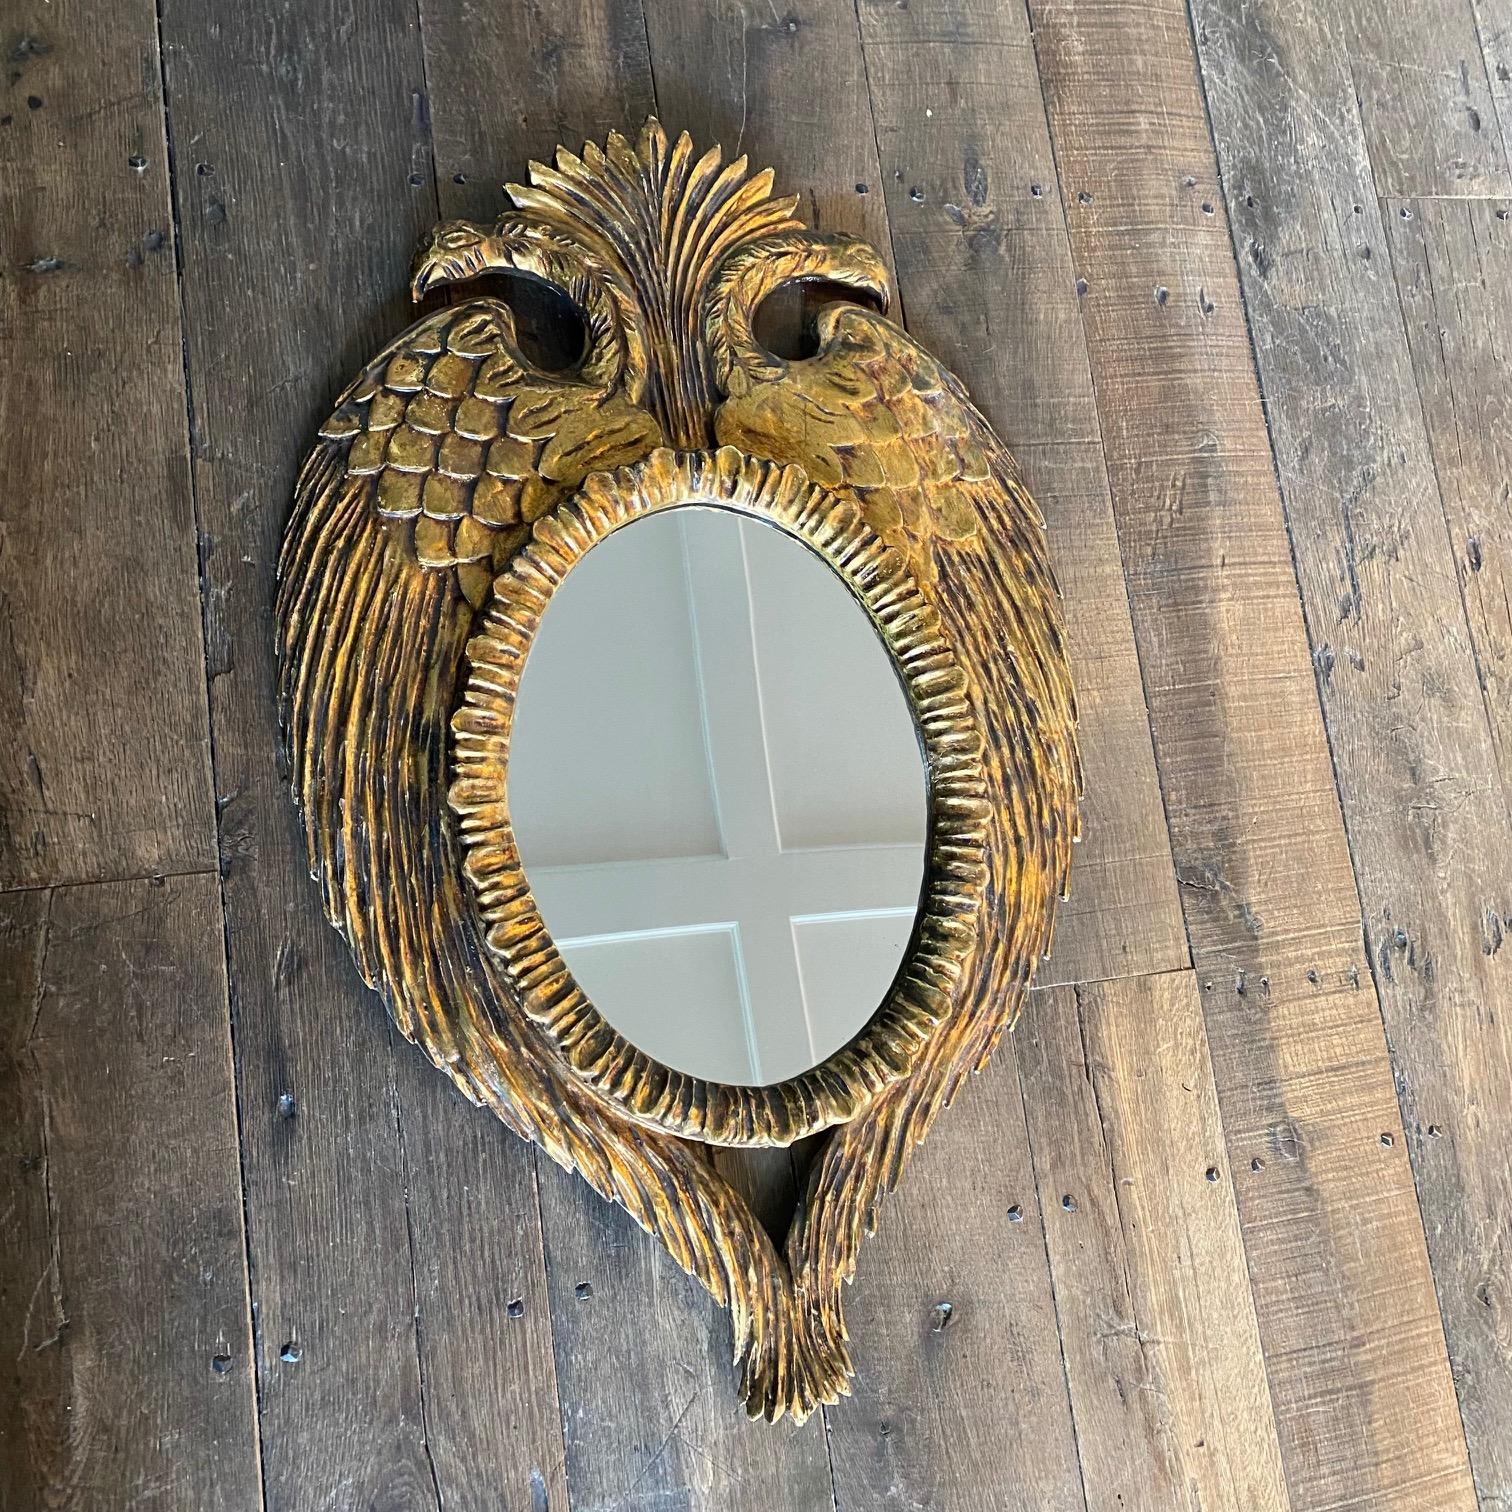 Exquisite French carved giltwood mirror frame in the form of a crowned bicephal eagle. Highly decorative frame with double-headed eagles, symmetric wings encasing the central oval mirror. This hand carved wood mirror is gilded with gold leaf, and